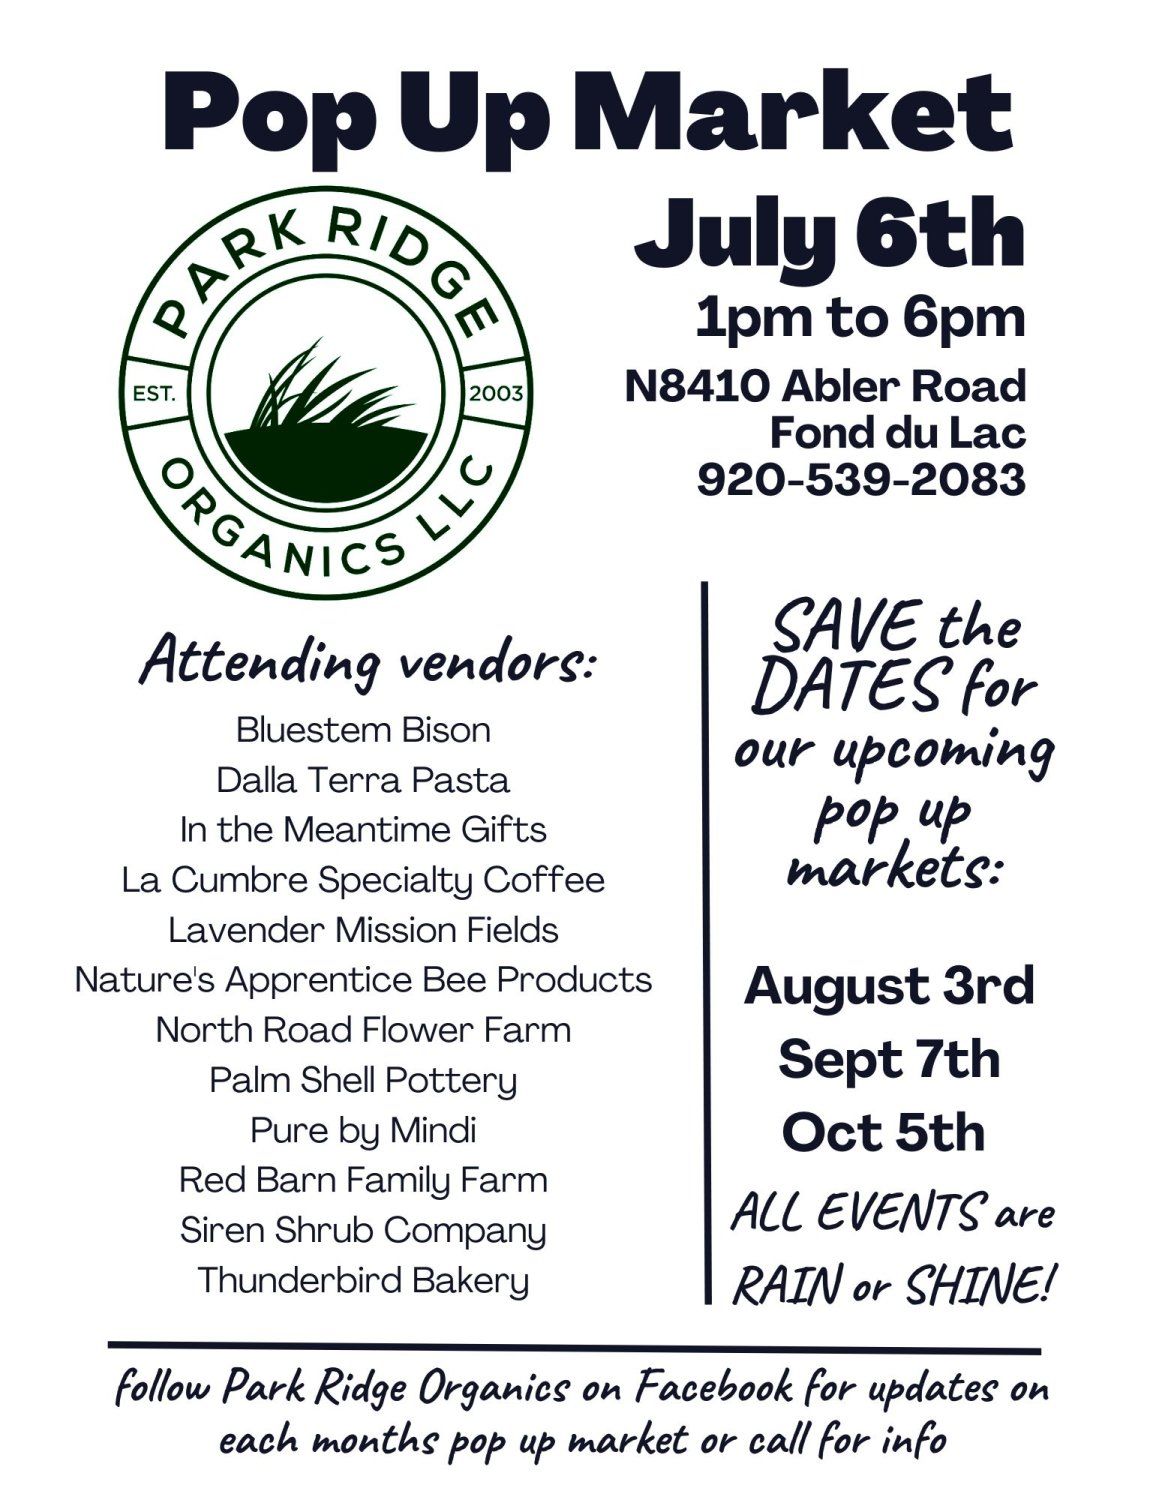 Pop Up Market July 6th at the Farm